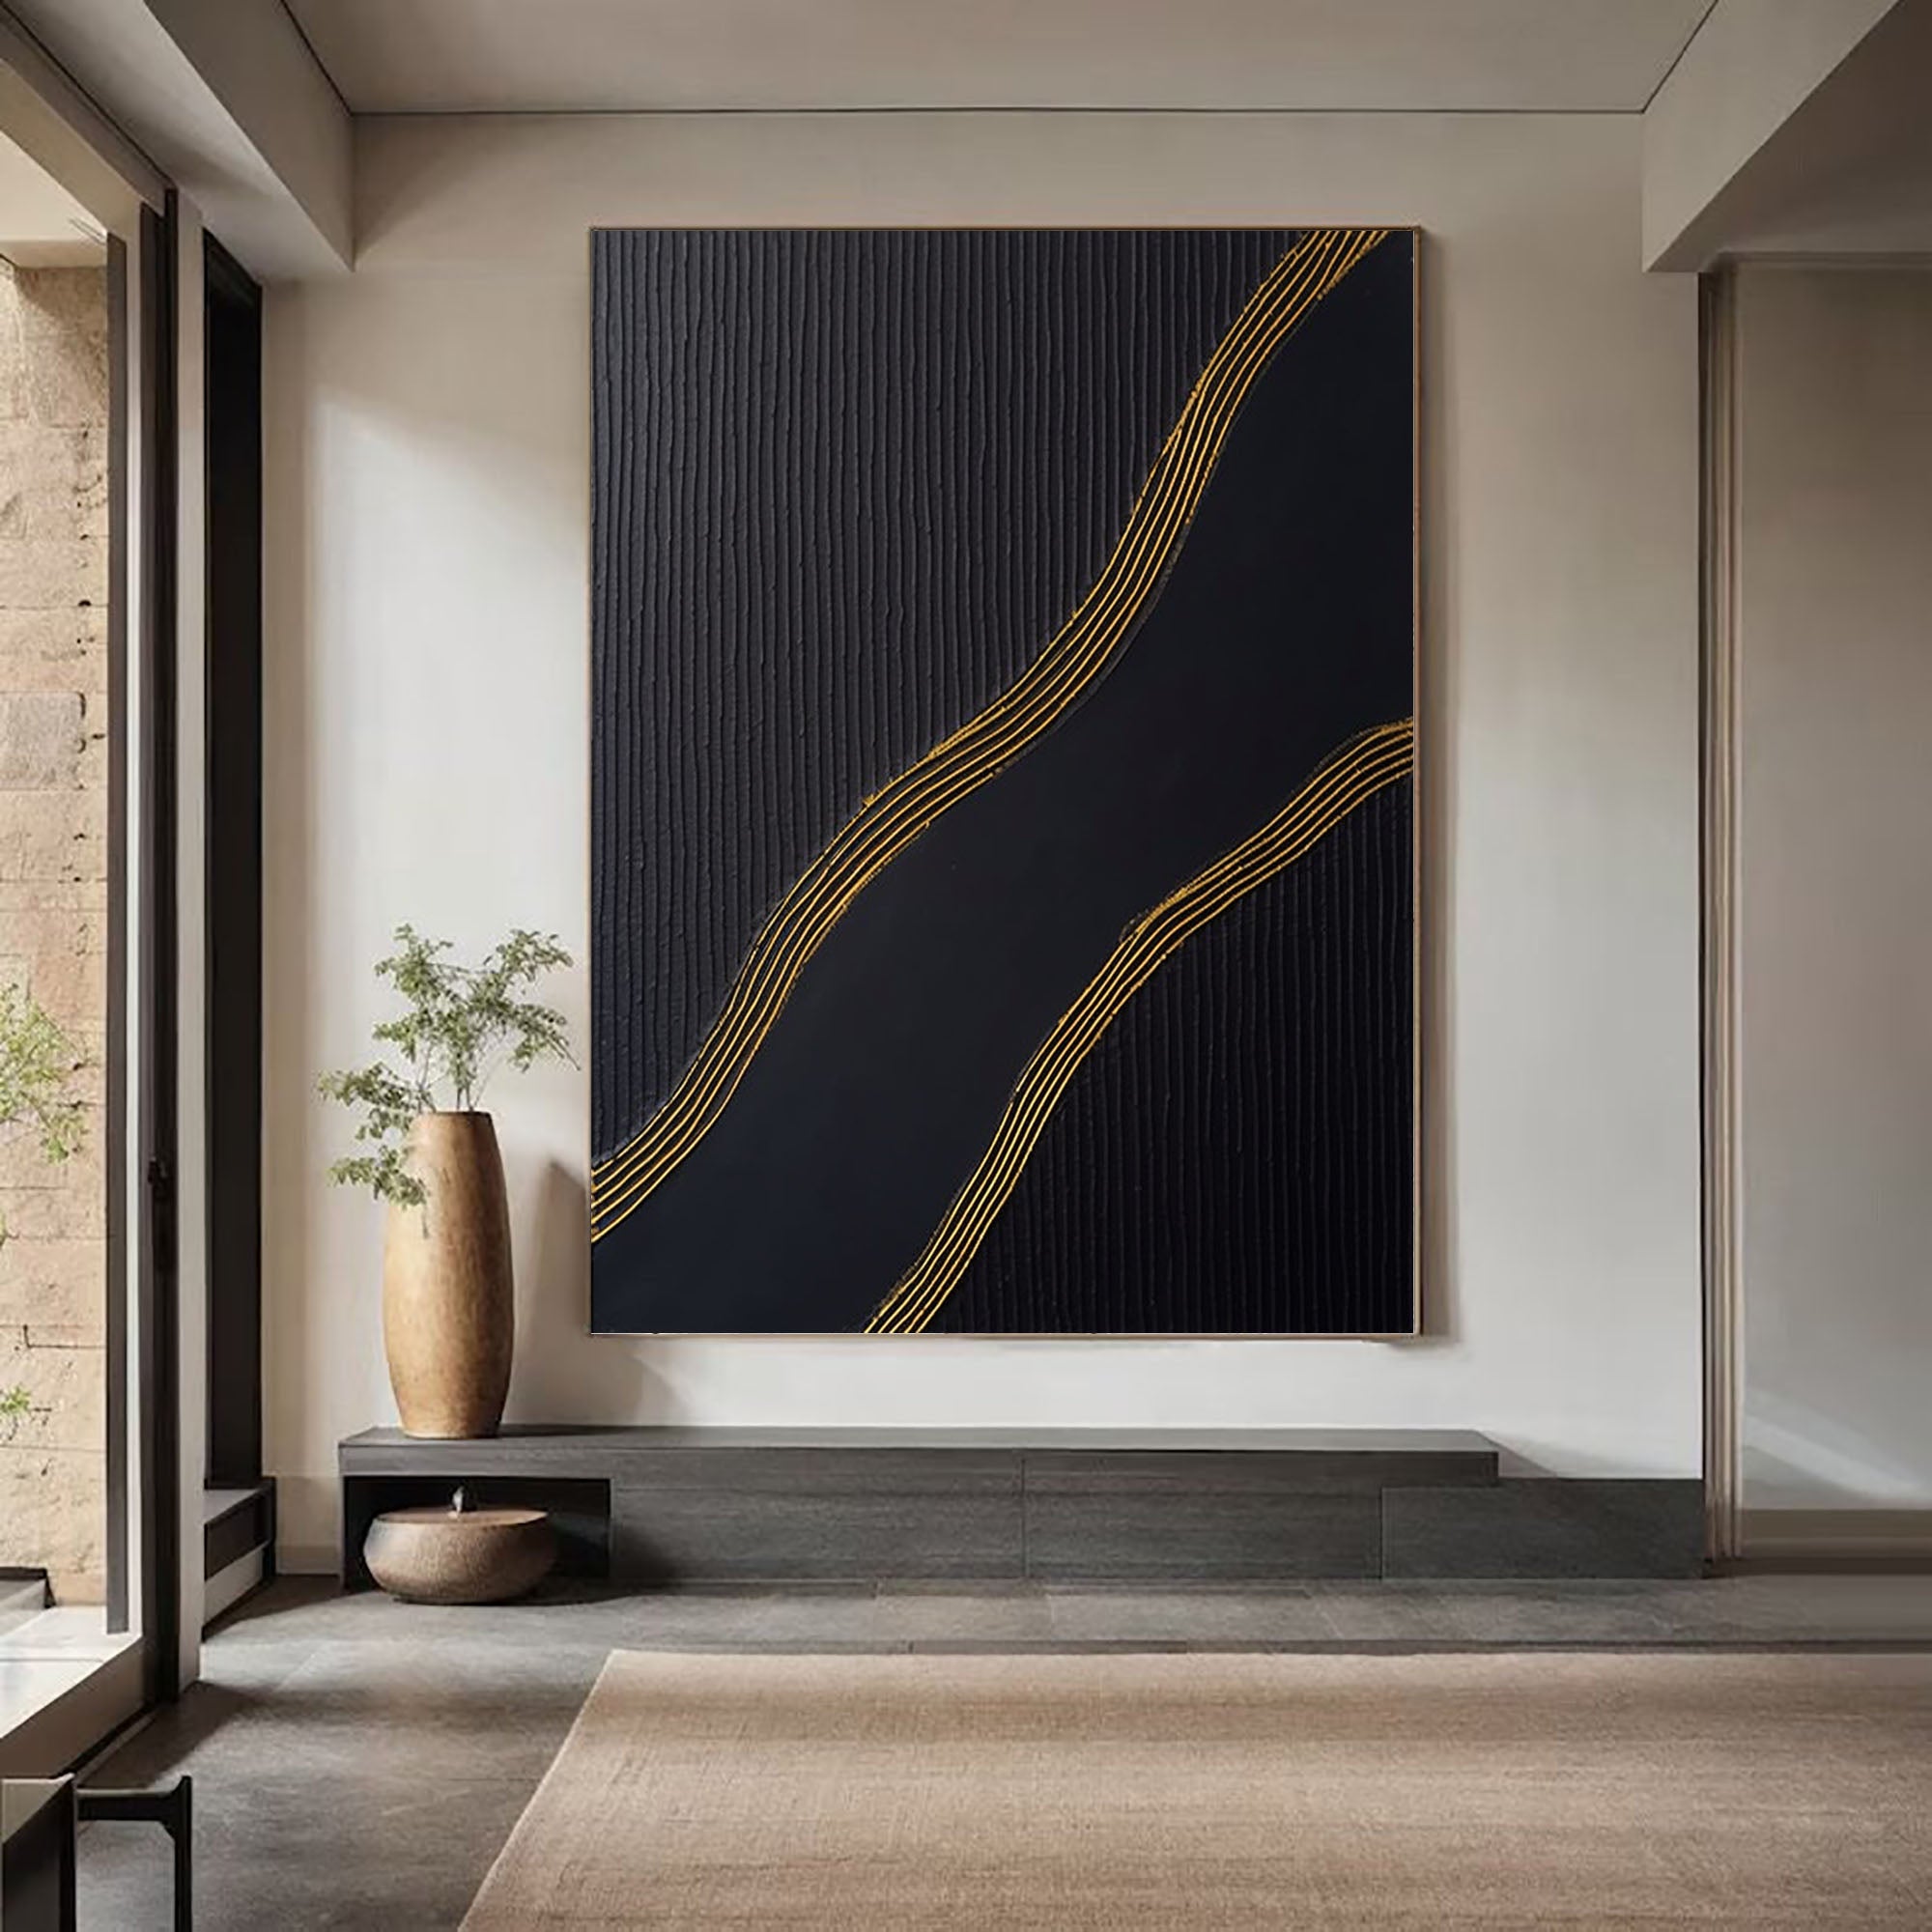 Large Black and Gold Abstract Canvas Art for Home Decor #BM 025